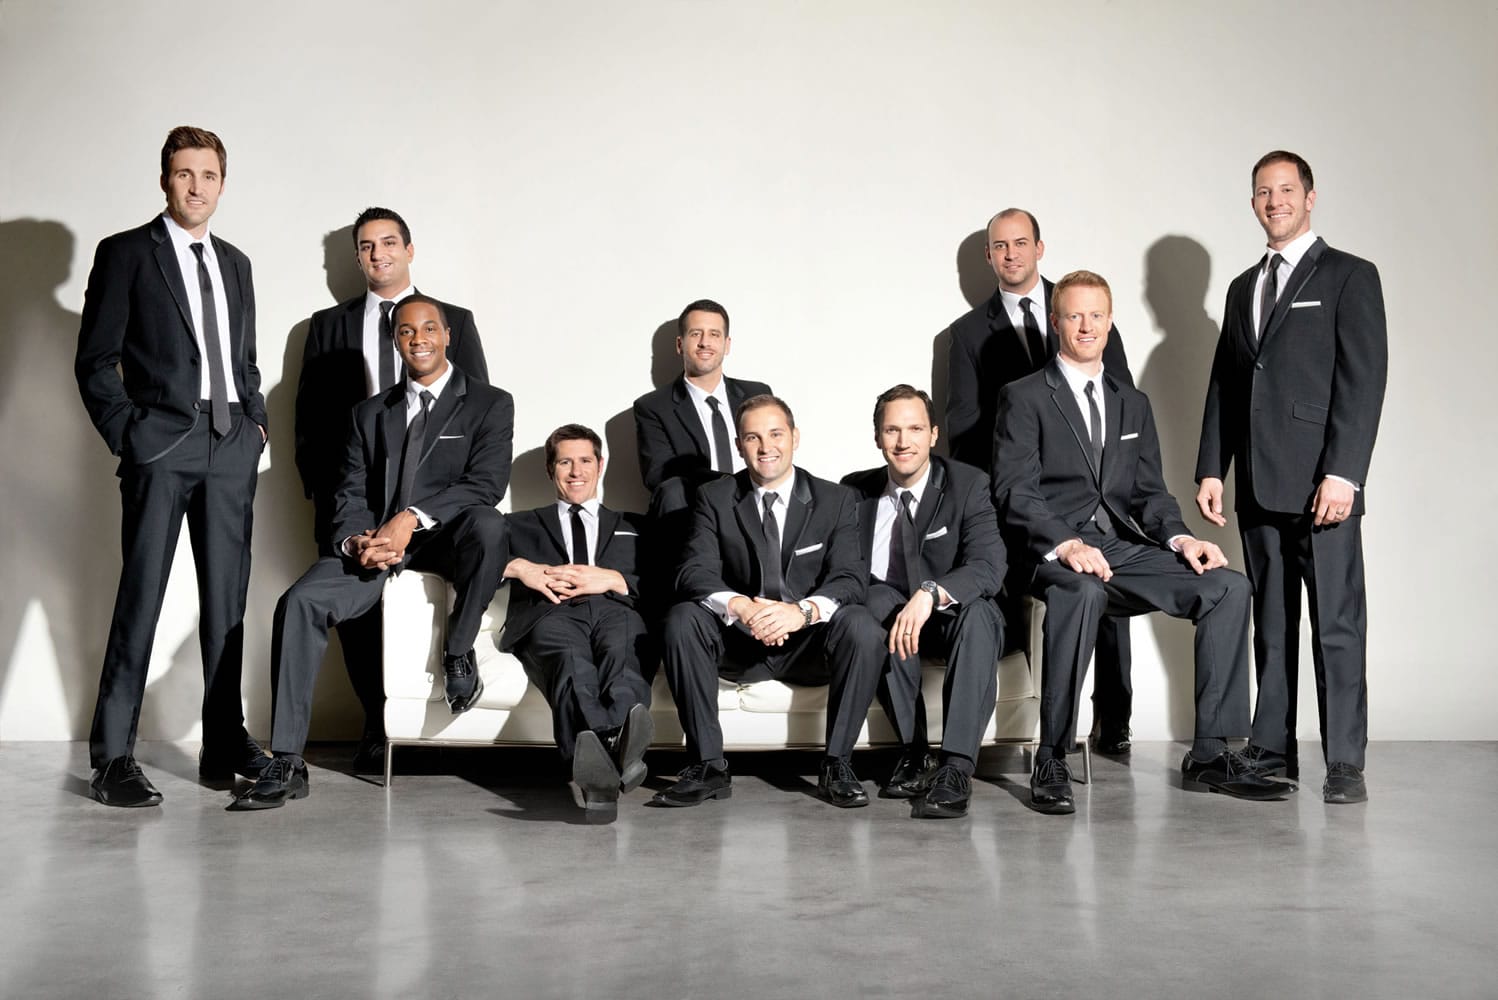 A cappella group Straight No Chaser will perform at the Arlene Schnitzer Concert Hall in Portland.